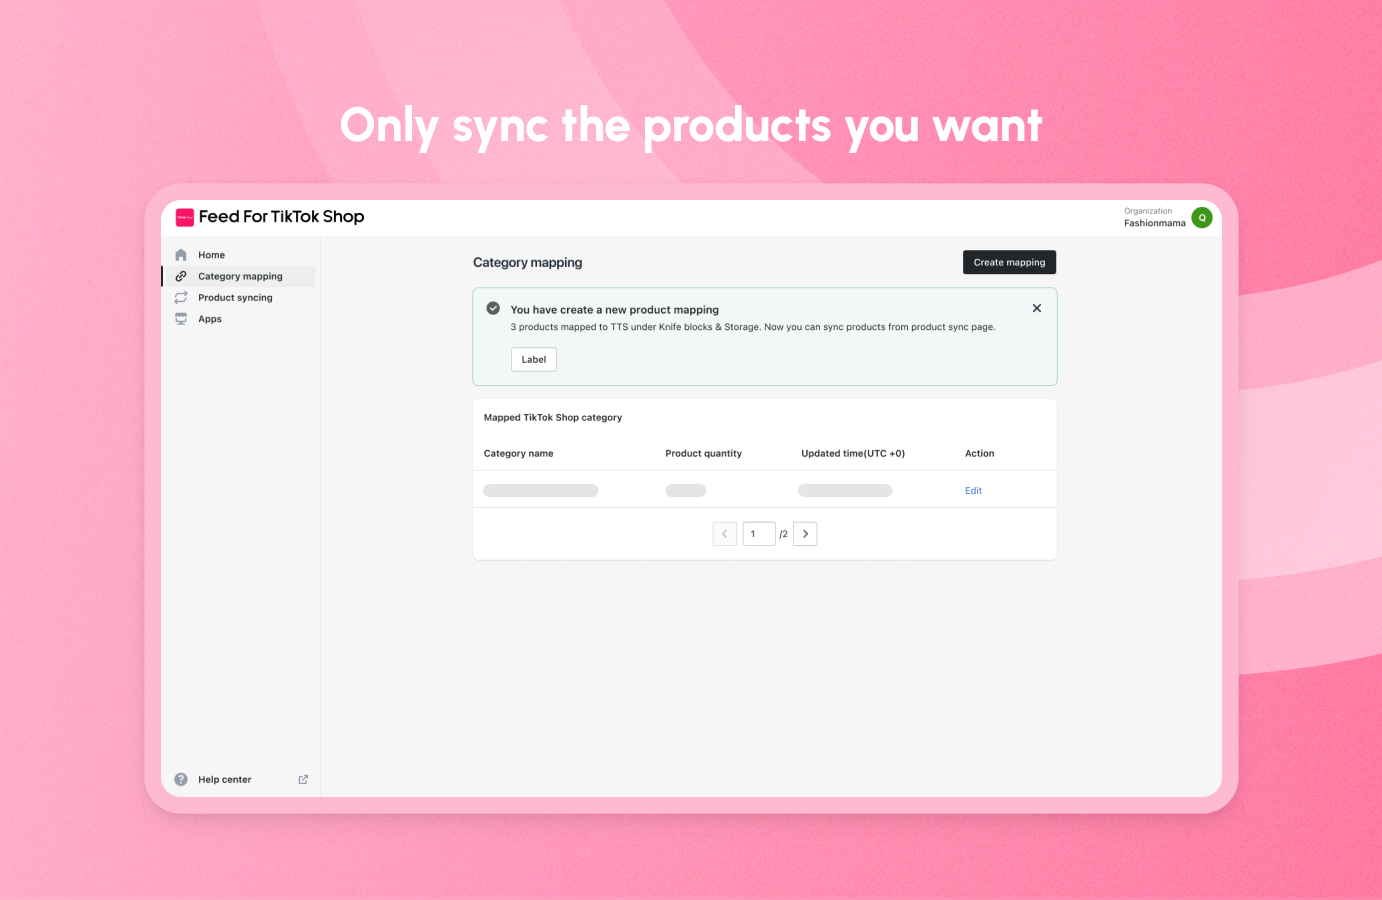 Only sync the products you want